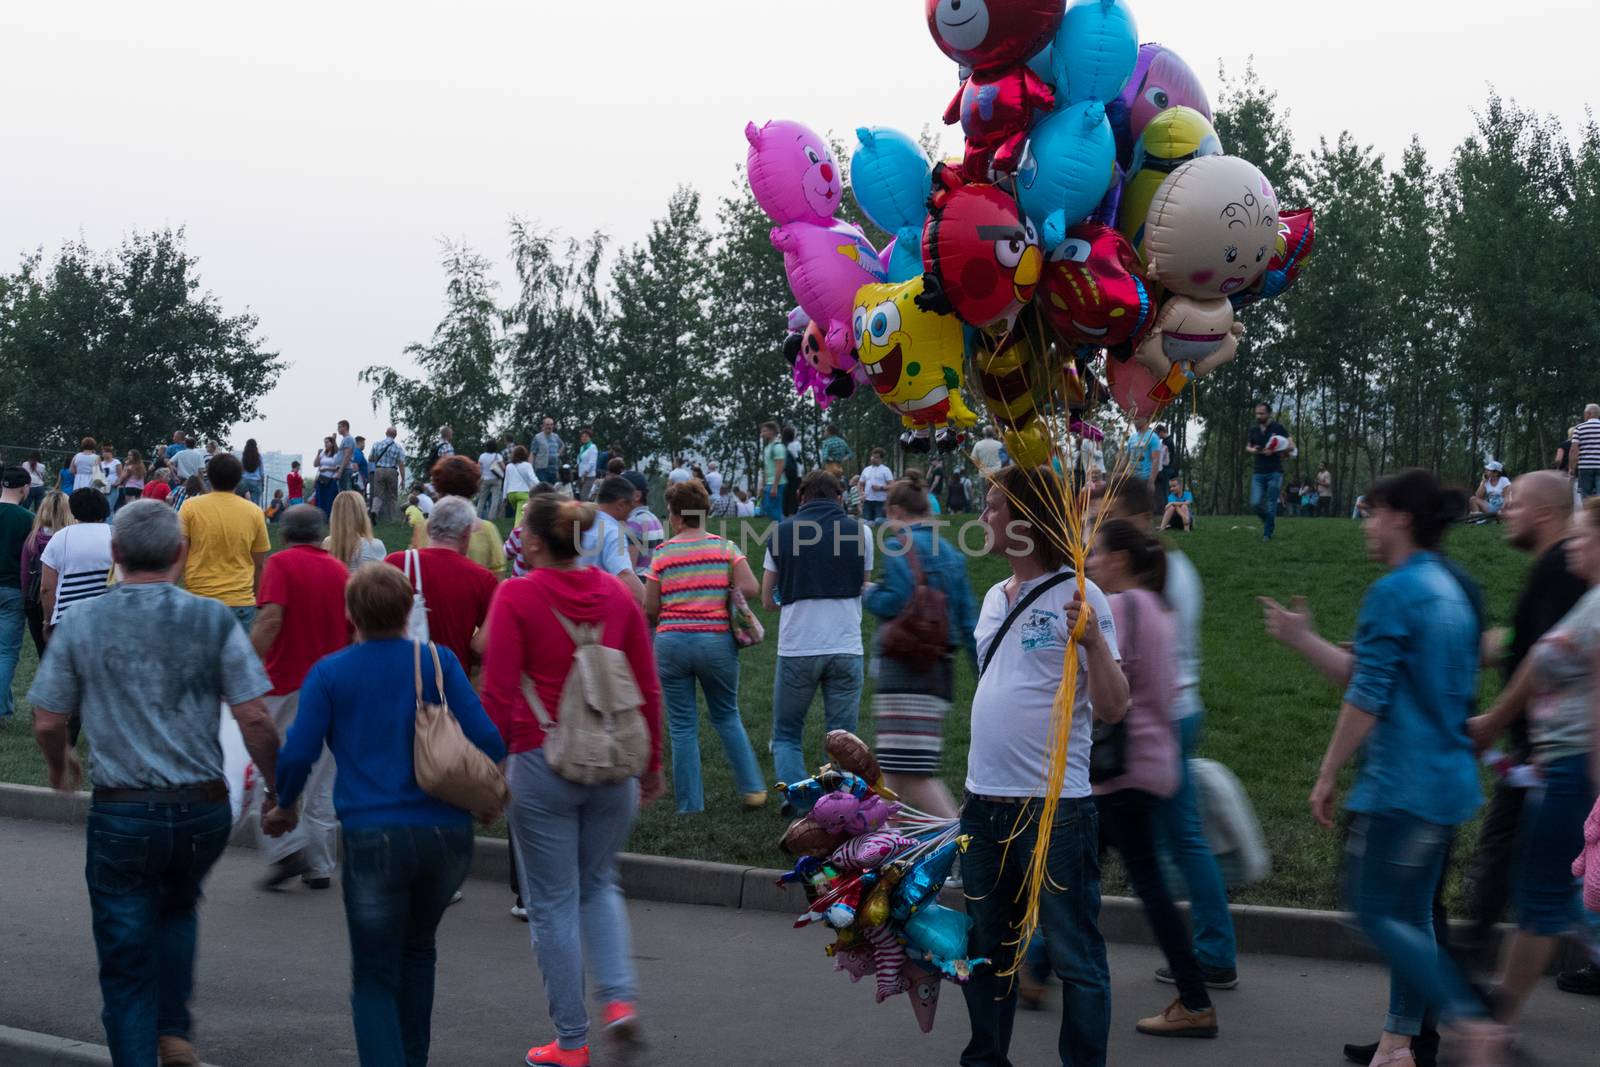 Seller balloons in crowd Russia ,Moscow. iuly 2016